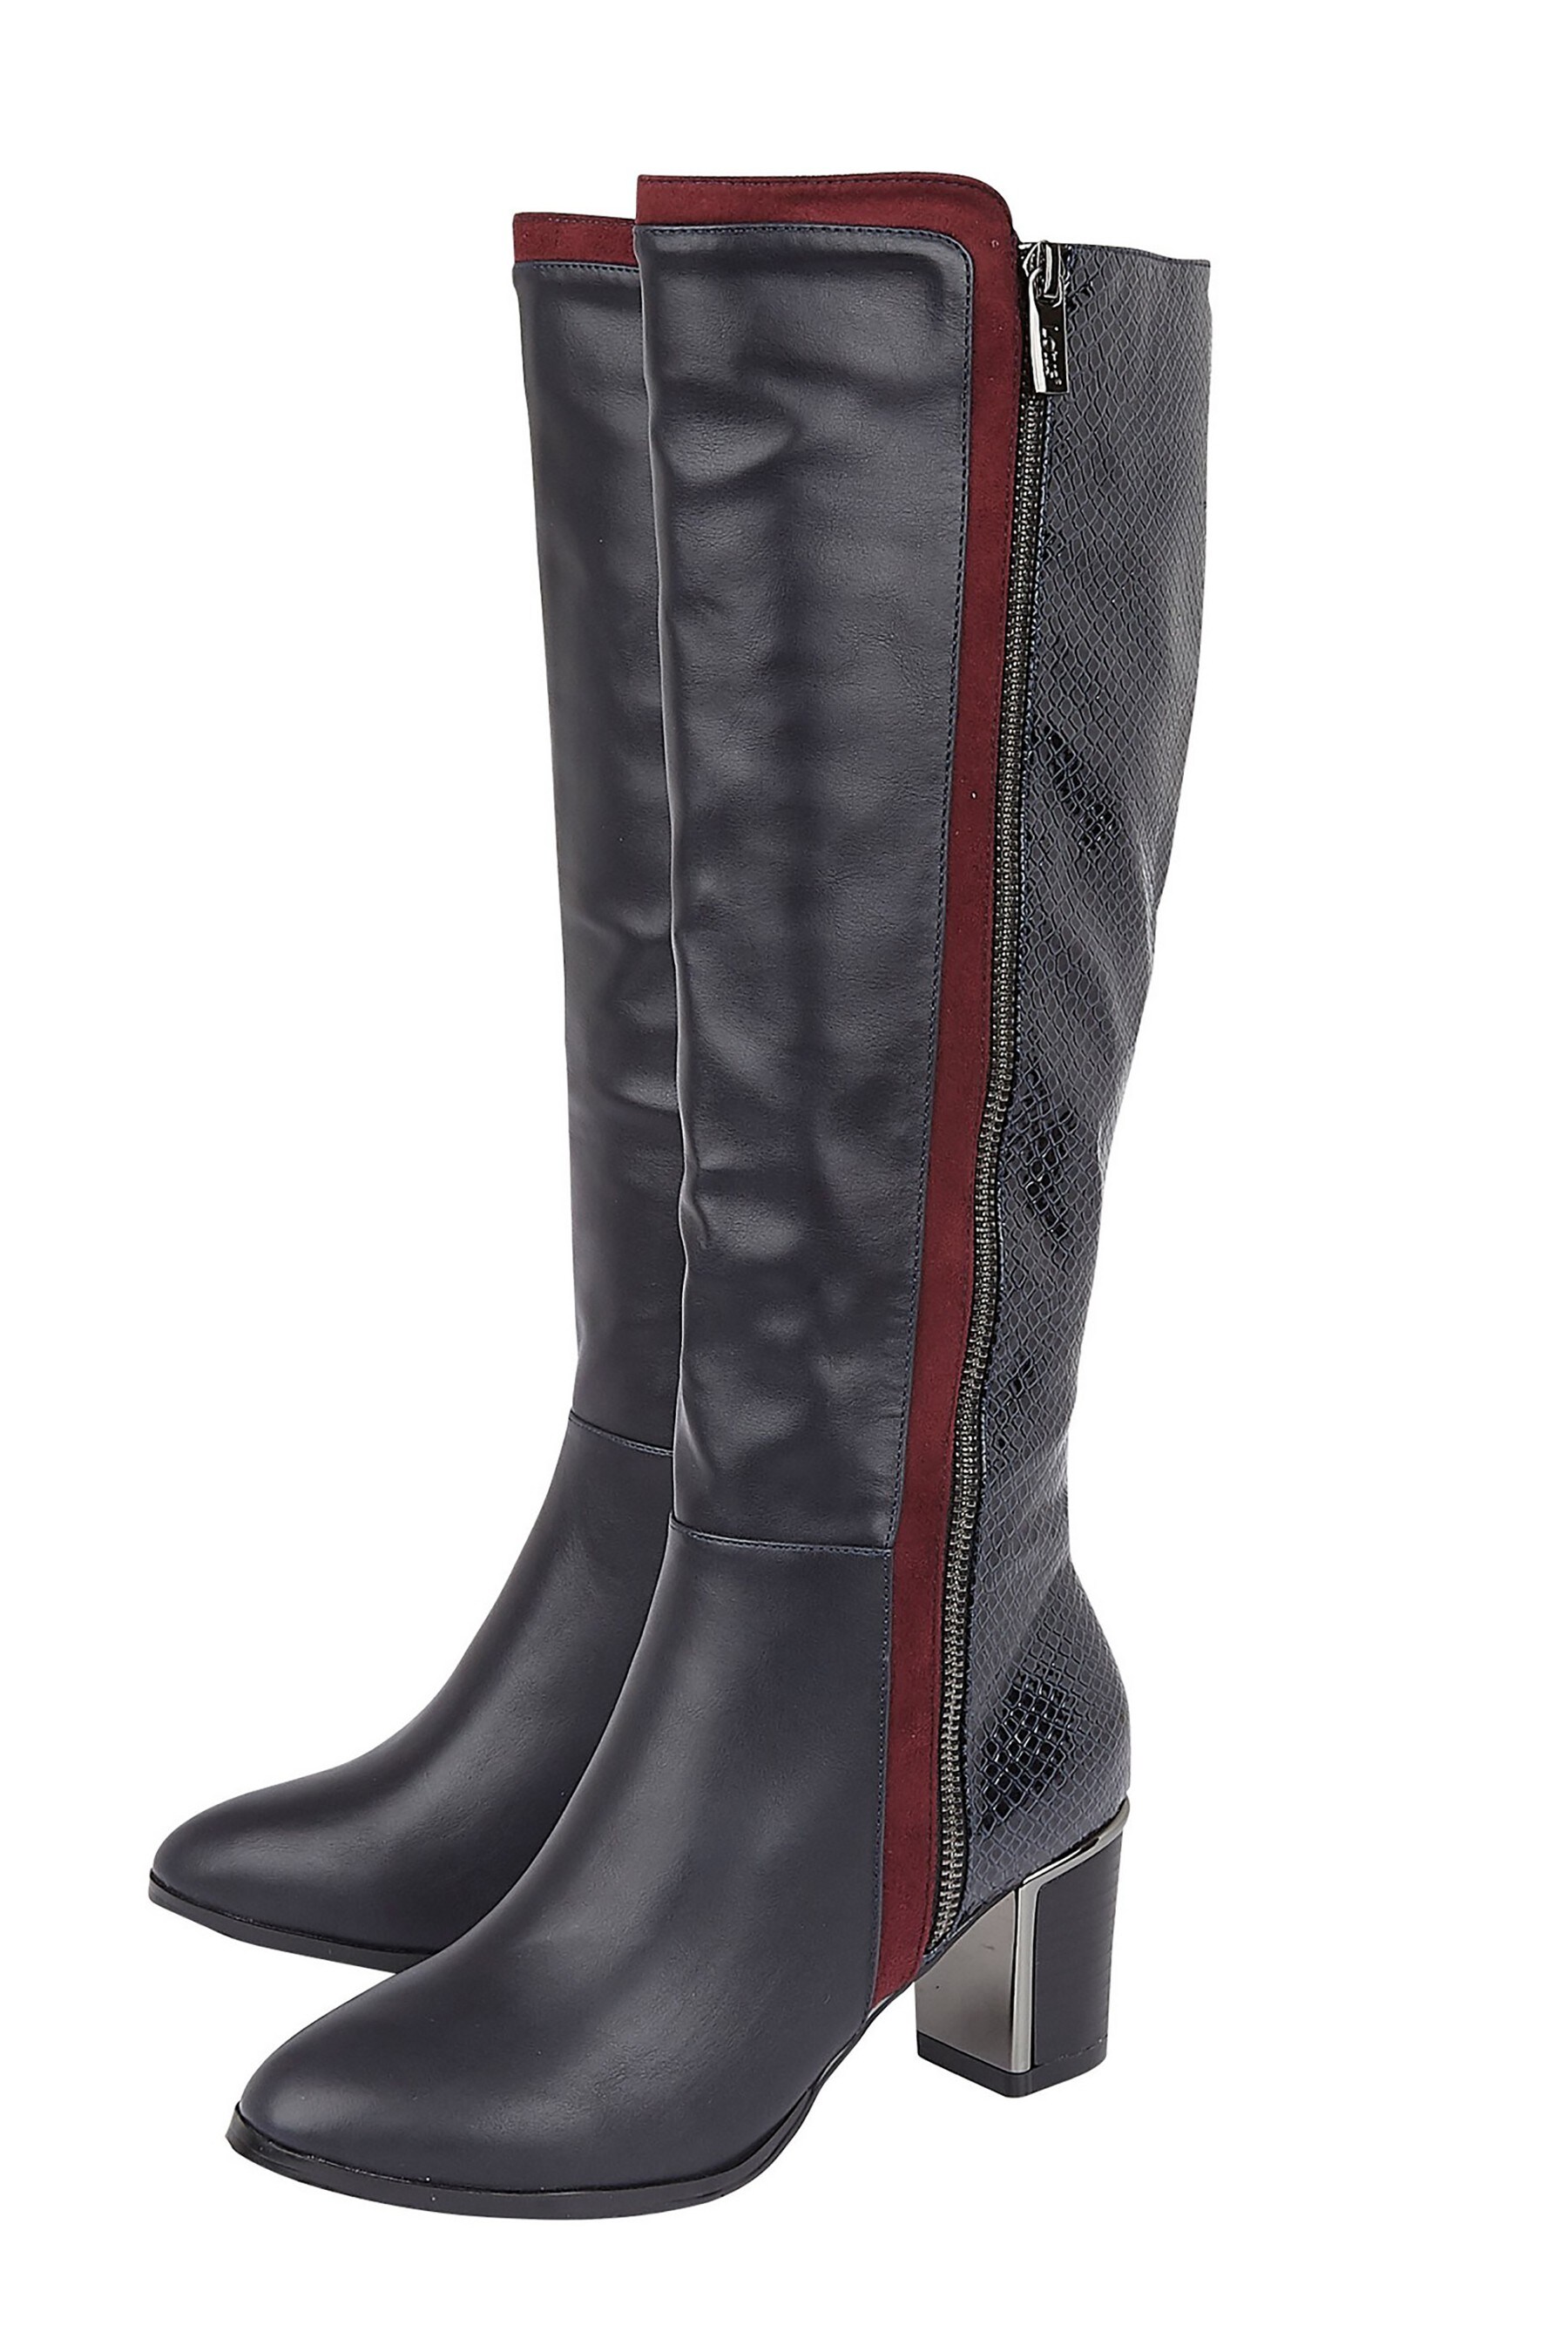 buy thigh high boots online